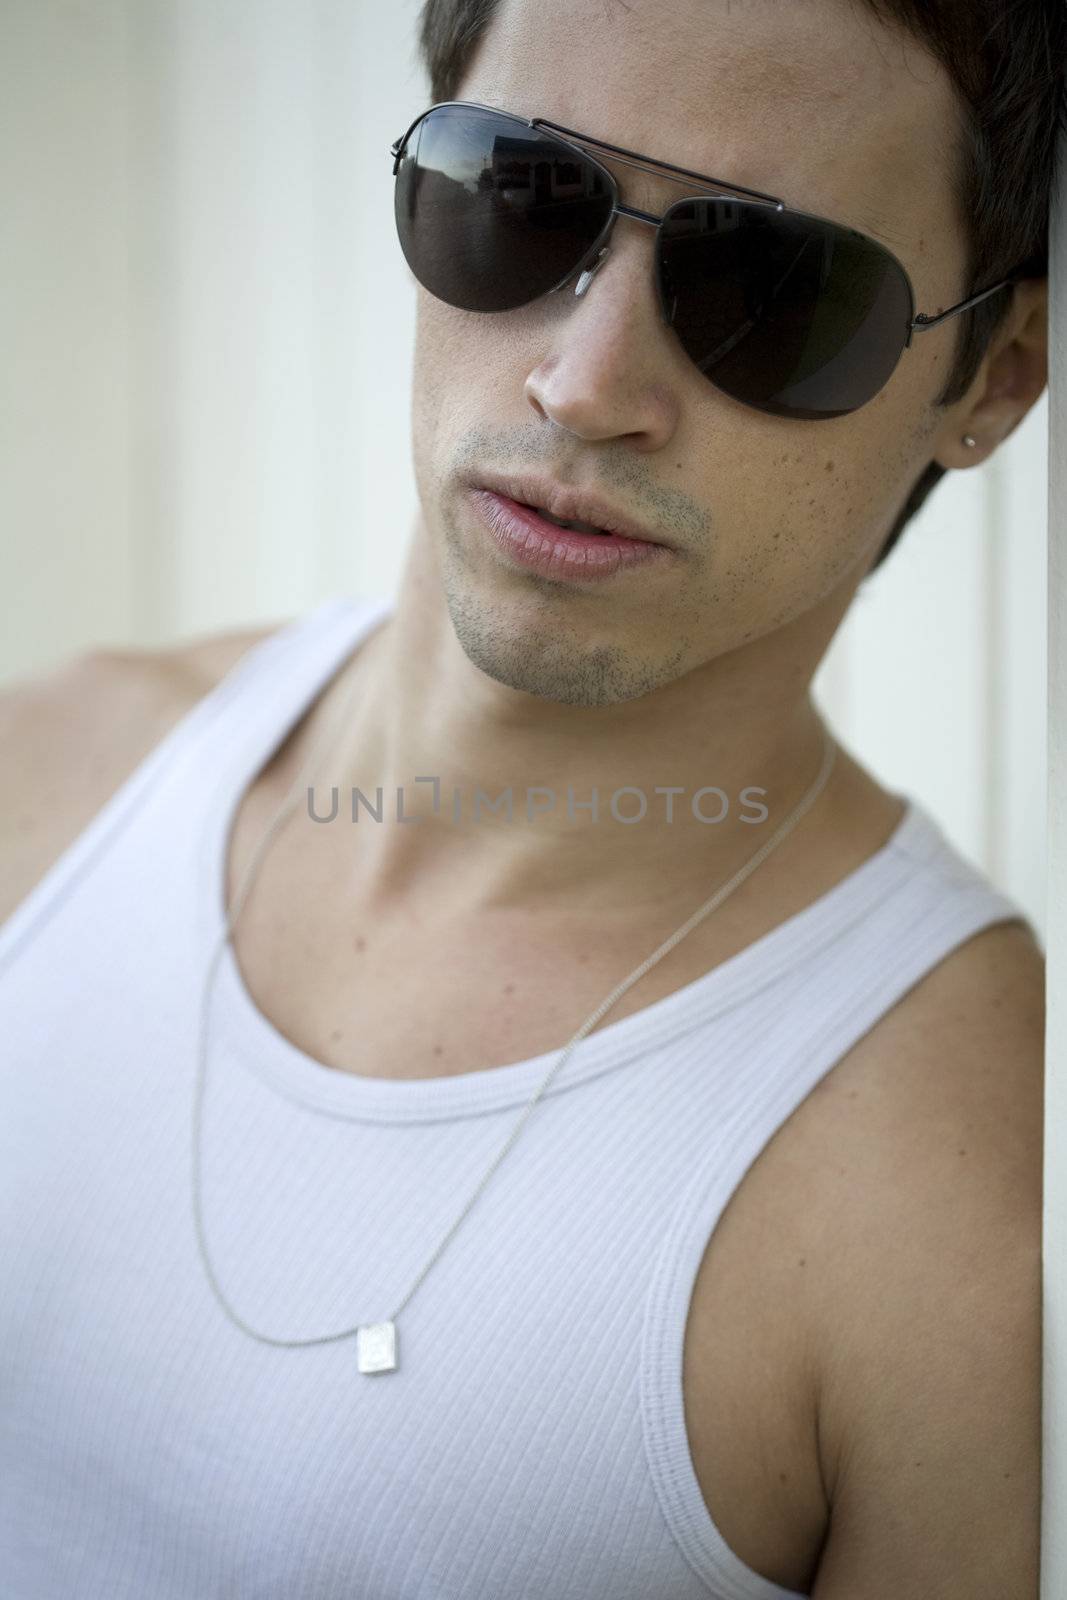 A young male model from Brazil in outdoors photograph, with aviator sunglasses.